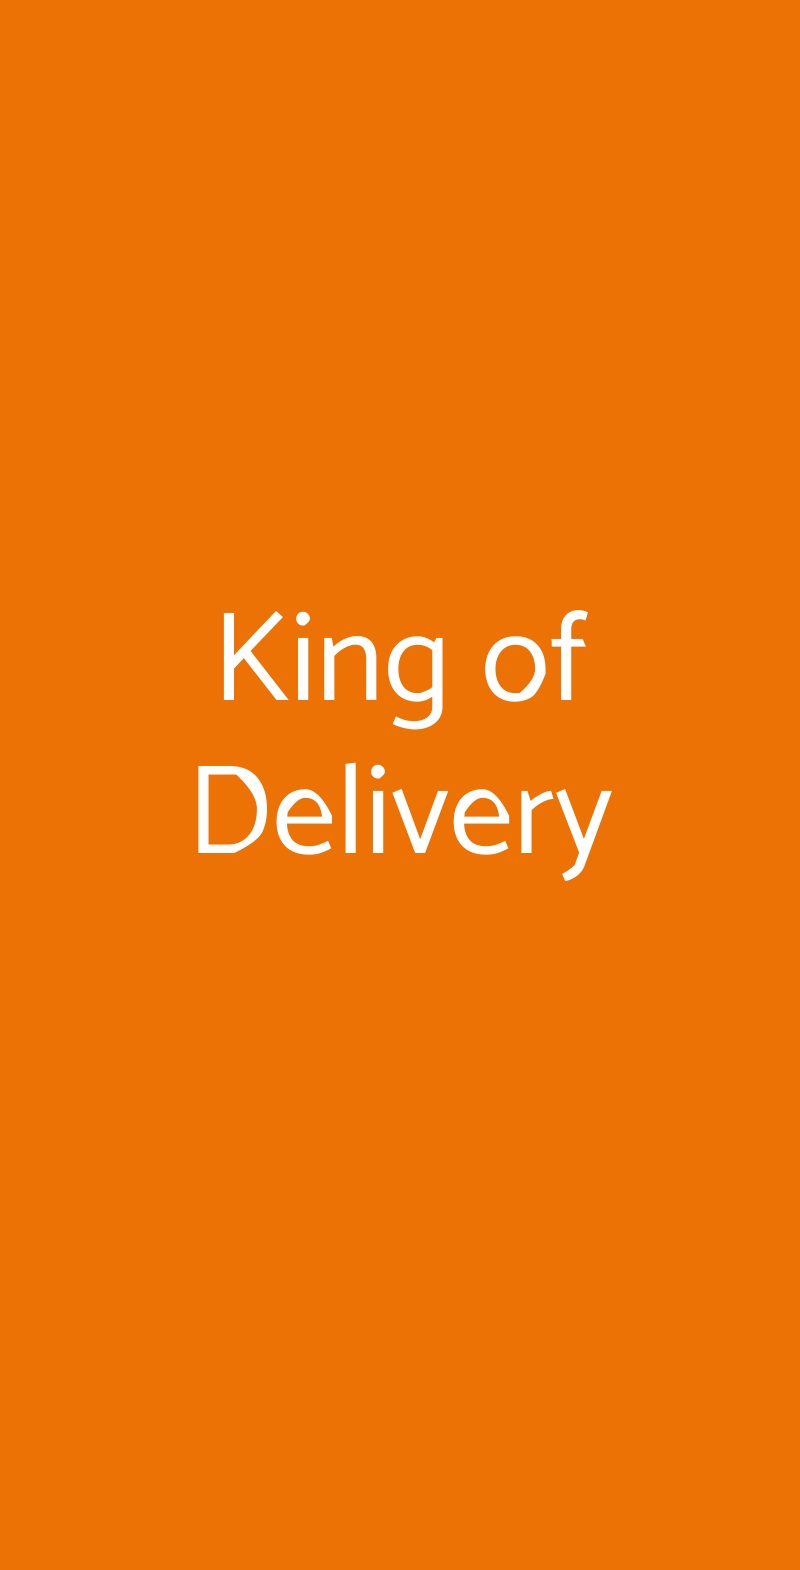 King of Delivery Roma menù 1 pagina